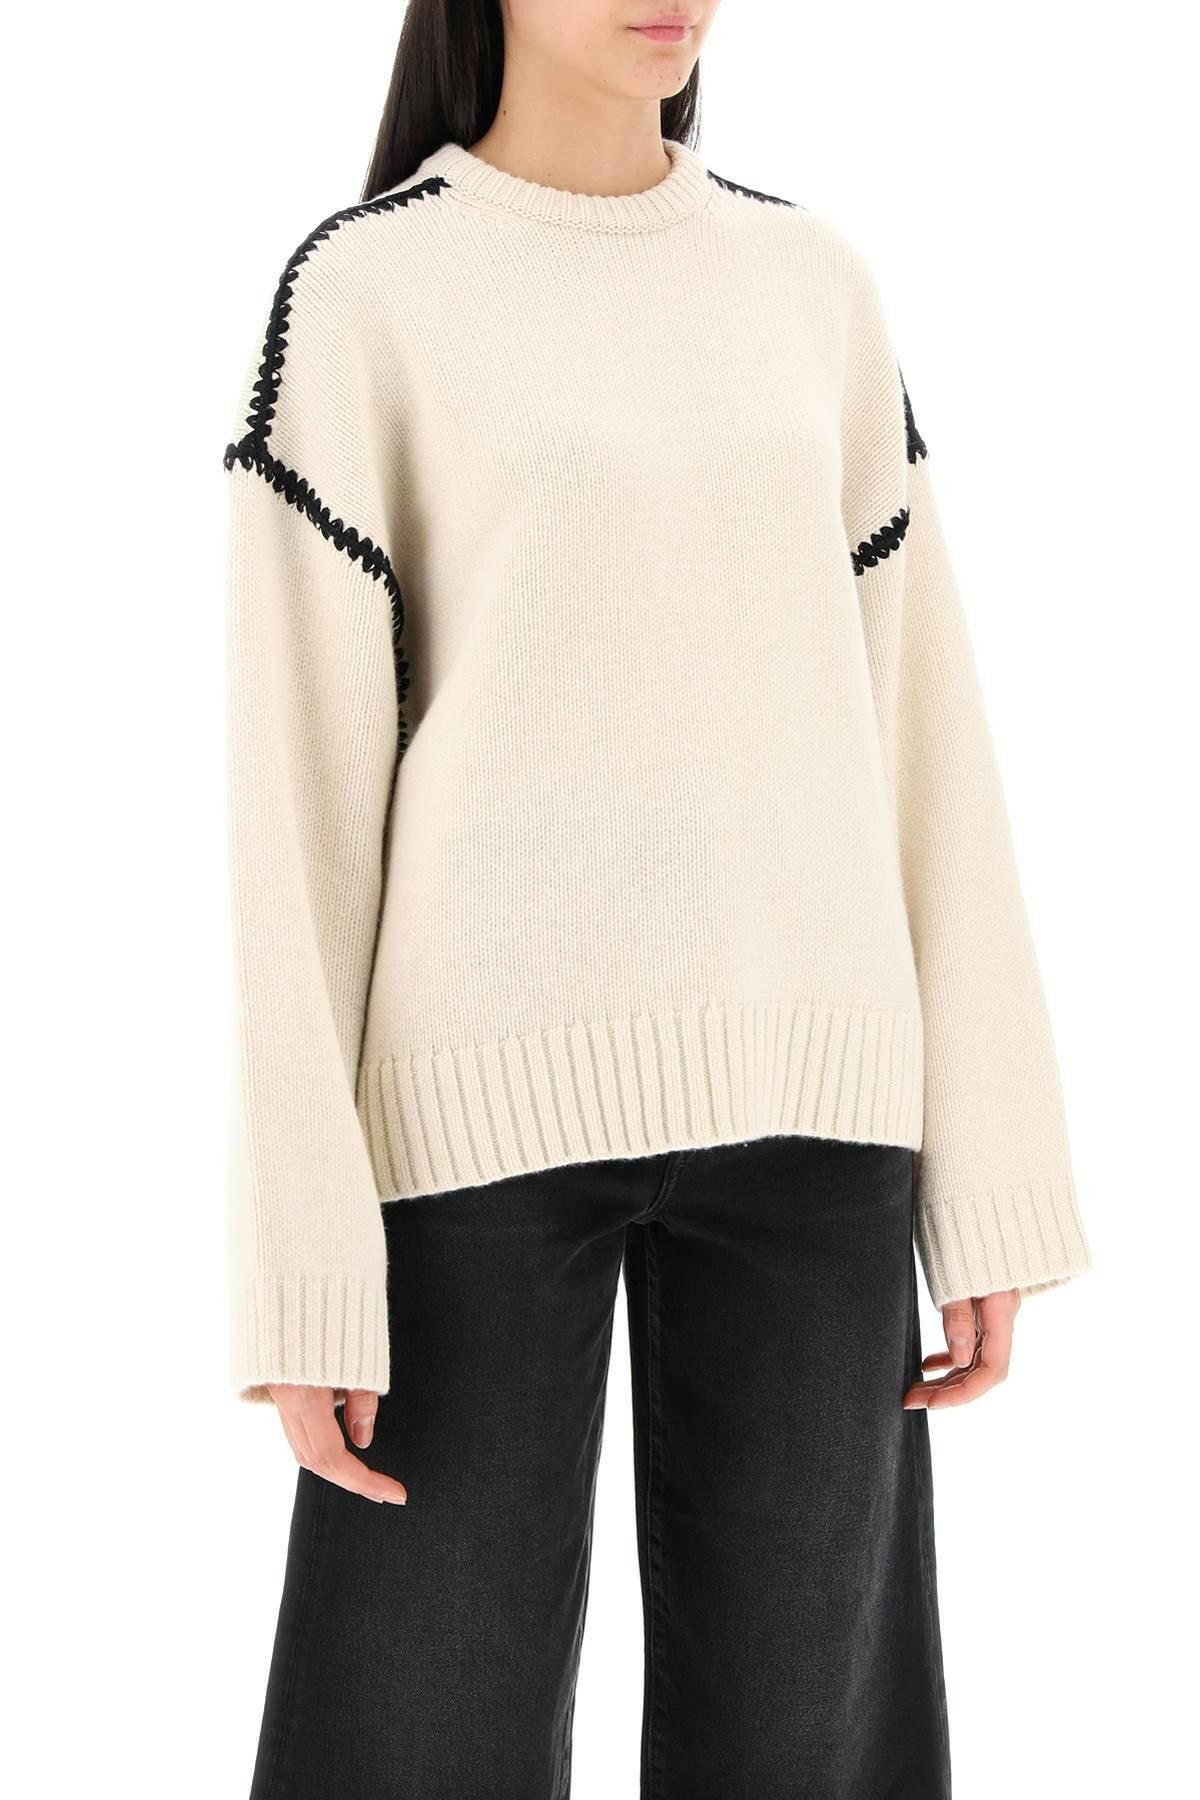 Toteme Embroidered wool cashmere knit snow - JOHN JULIA